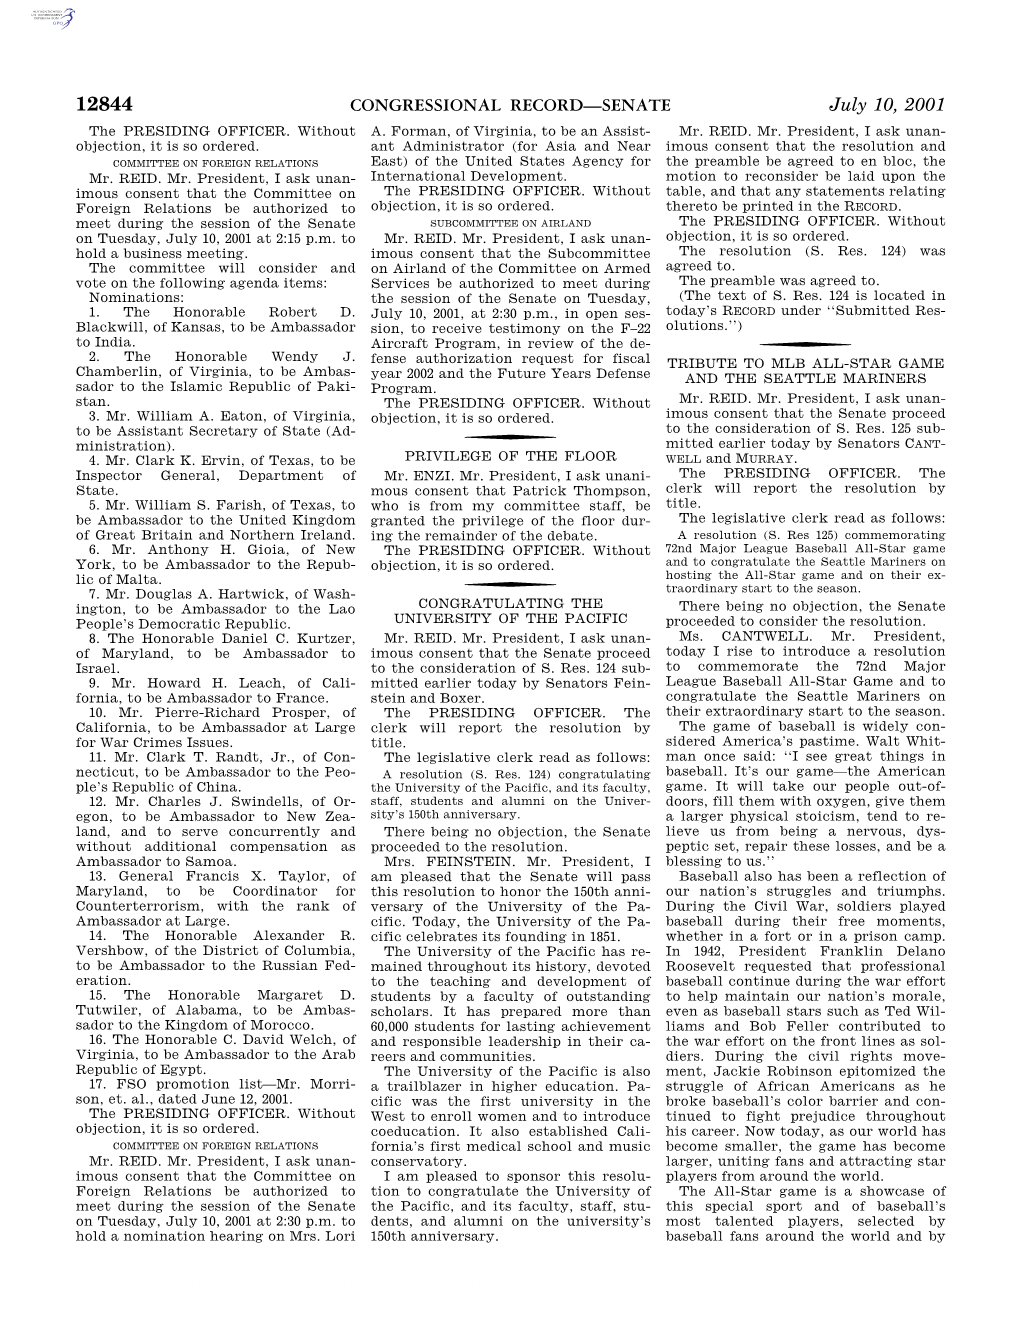 CONGRESSIONAL RECORD—SENATE July 10, 2001 the PRESIDING OFFICER